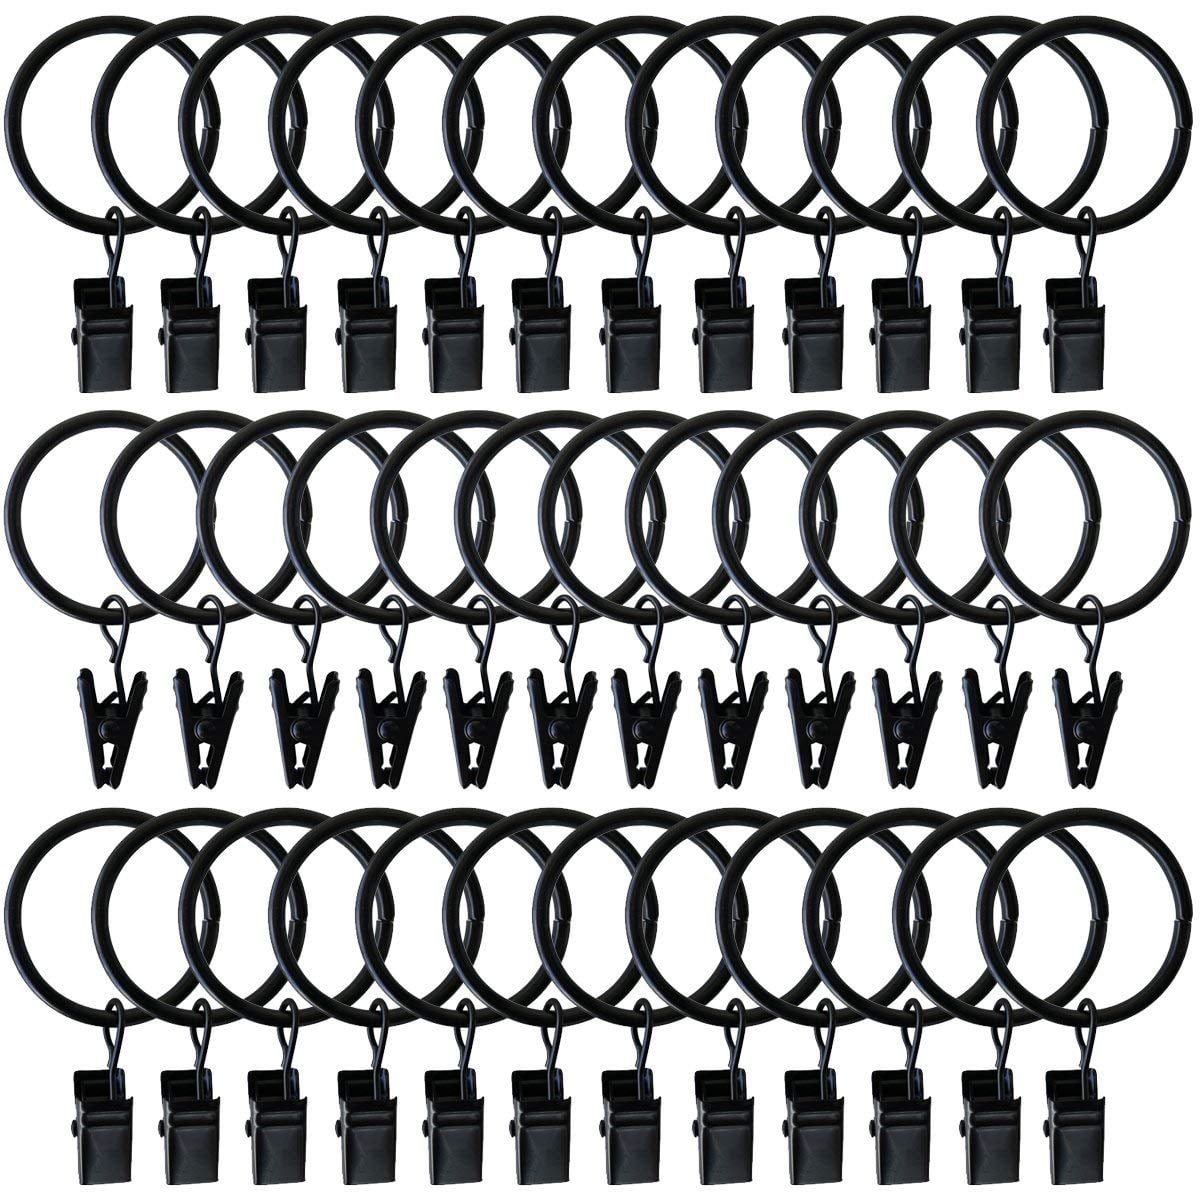 14 piece Set of 2" Rustproof Black Metal Curtain Rings with Clips Lot Easy to do 